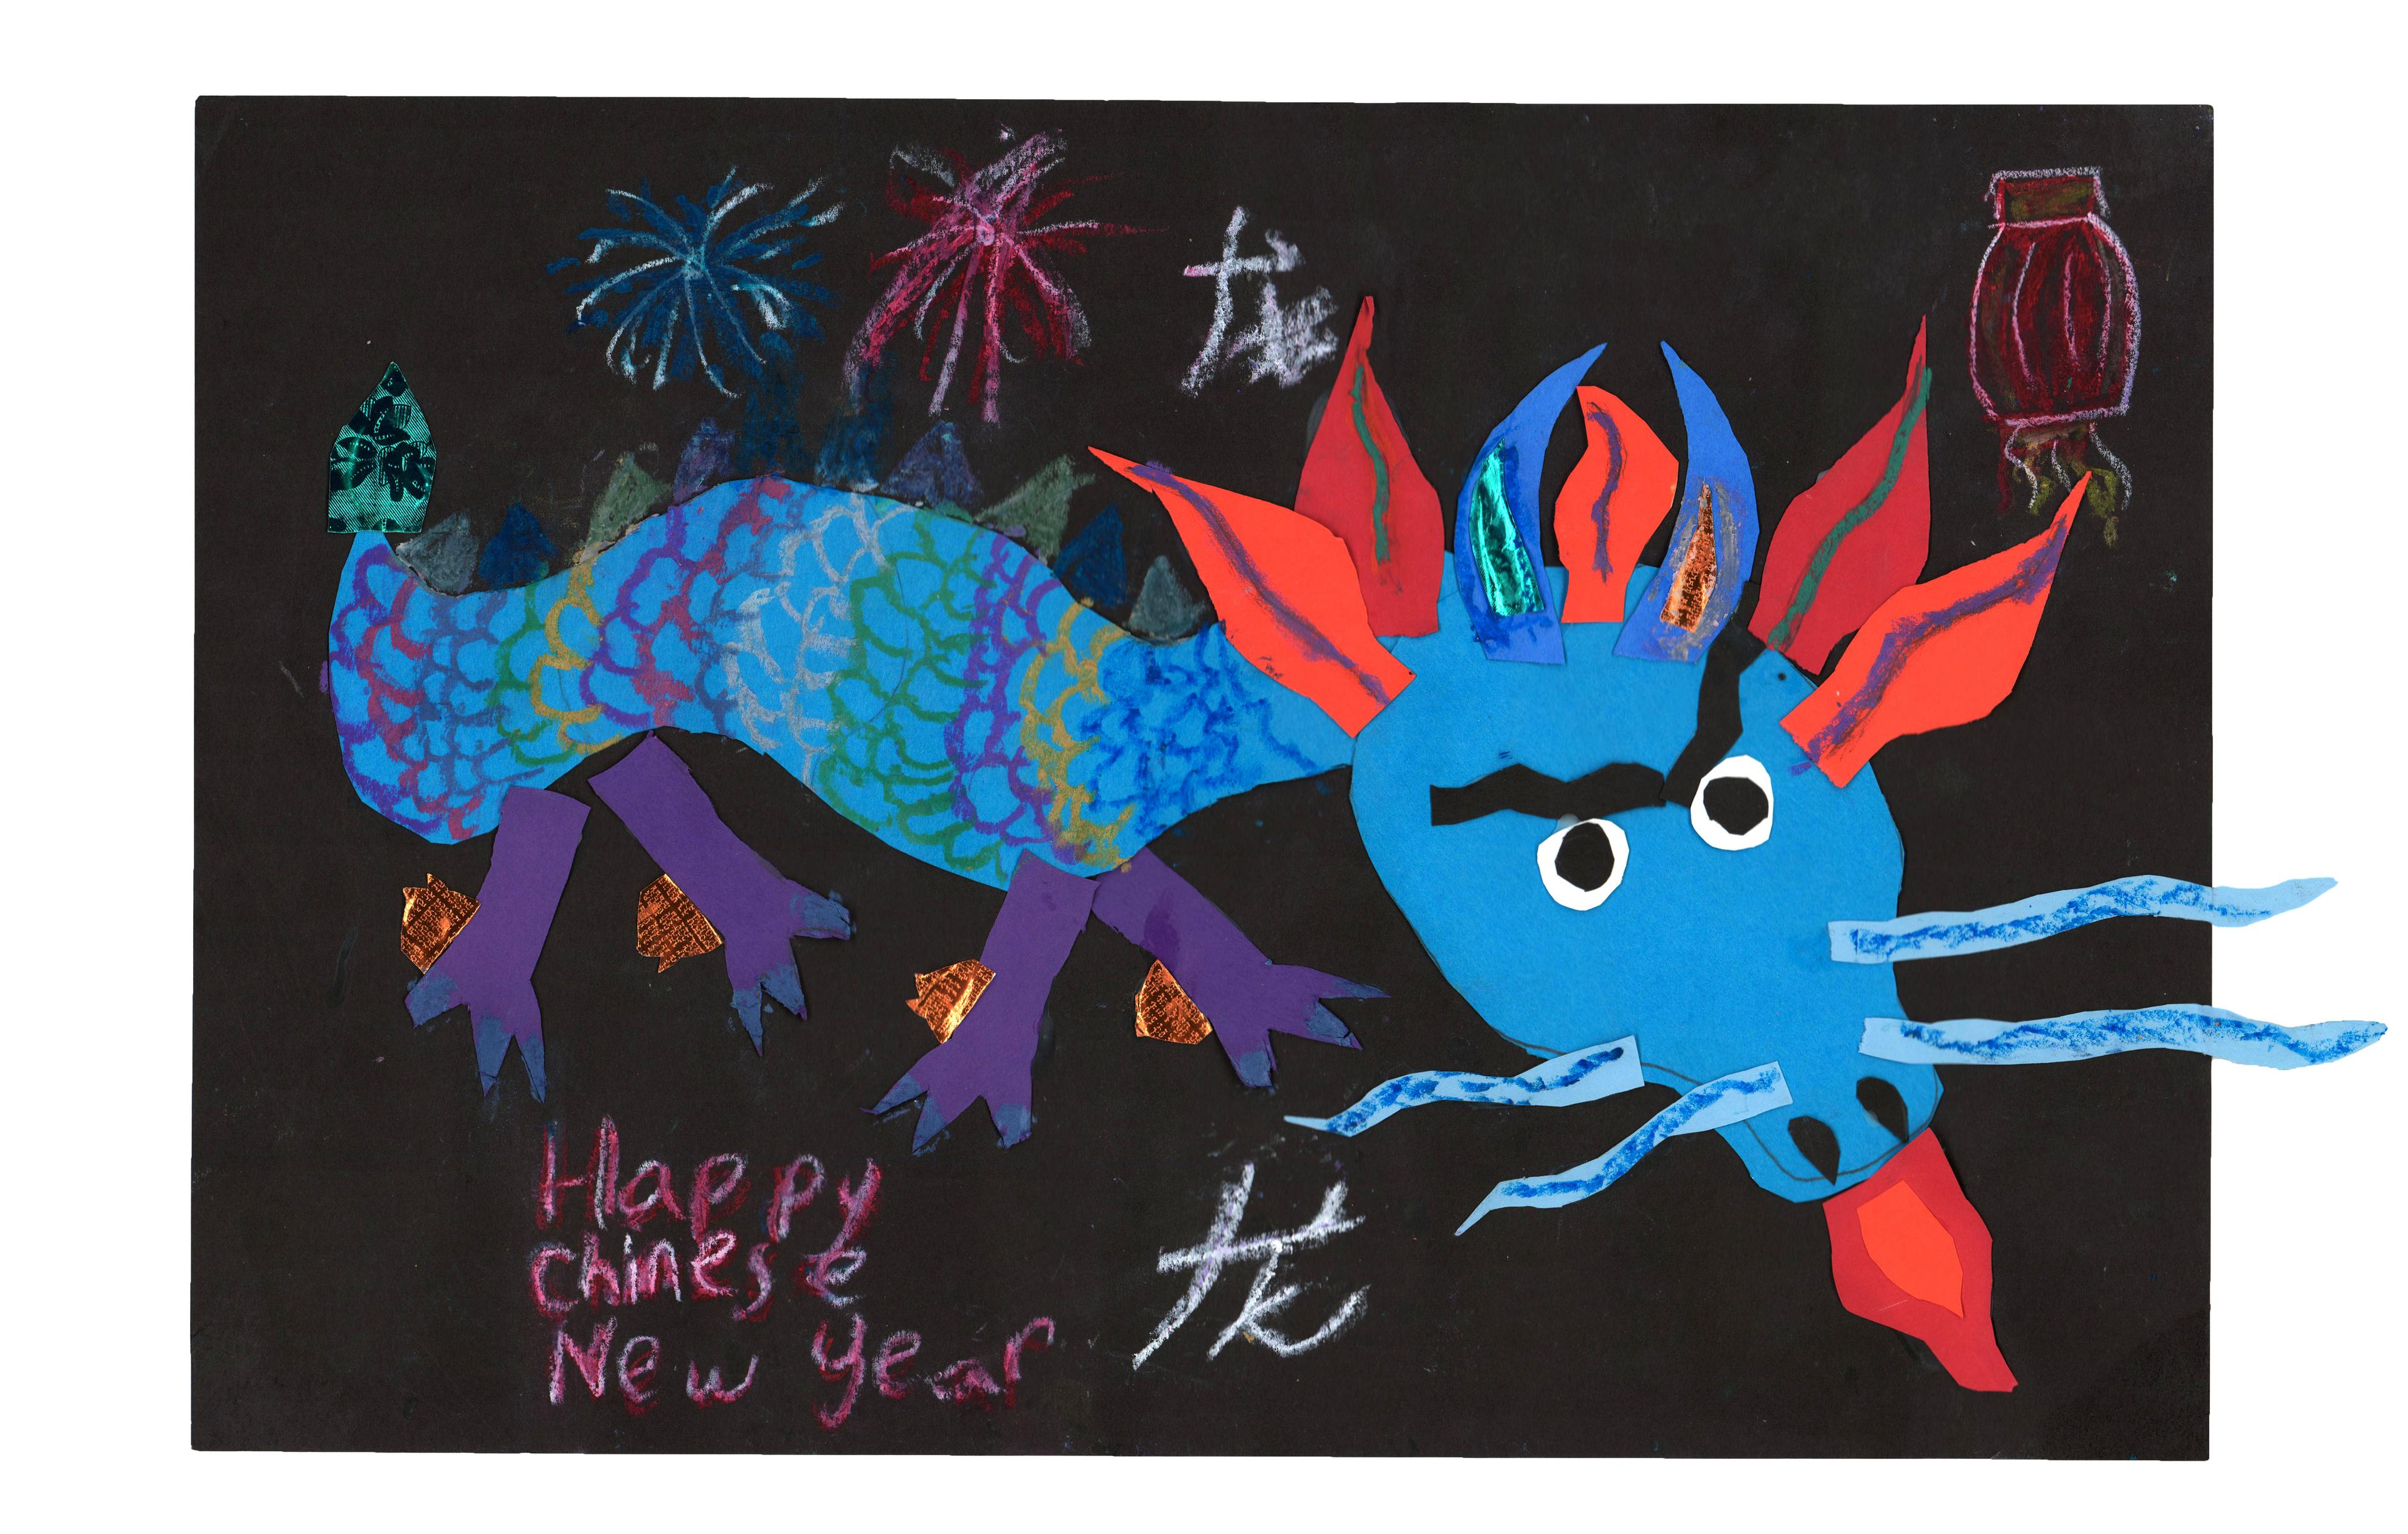 Drawing of a blue dragon facing right on a black background made with construction paper and oil pastels. The dragon has four purple legs with blue toes and a pattern of multicolored scales on its body changing from blue to red, green, yellow, purple, and white. The dragon has two blue horns on top of its head, surrounded by bright red feathers. The dragon's face has a thick, black, single eyebrow bent downward over two fierce eyes with black pupils. Two blue whiskers emerge from each side of the dragon's snout, and a fiery red tongue sticks out of its mouth. The dragon also has blue and green spikes running along the top of its spine. A red Chinese lantern is drawn at top right, and two bursts of fireworks, one blue and one pink, are drawn at top left. At bottom left is written Happy Chinese New Year. A pair of white Chinese characters meaning dragon appear above and below the middle of the dragon.